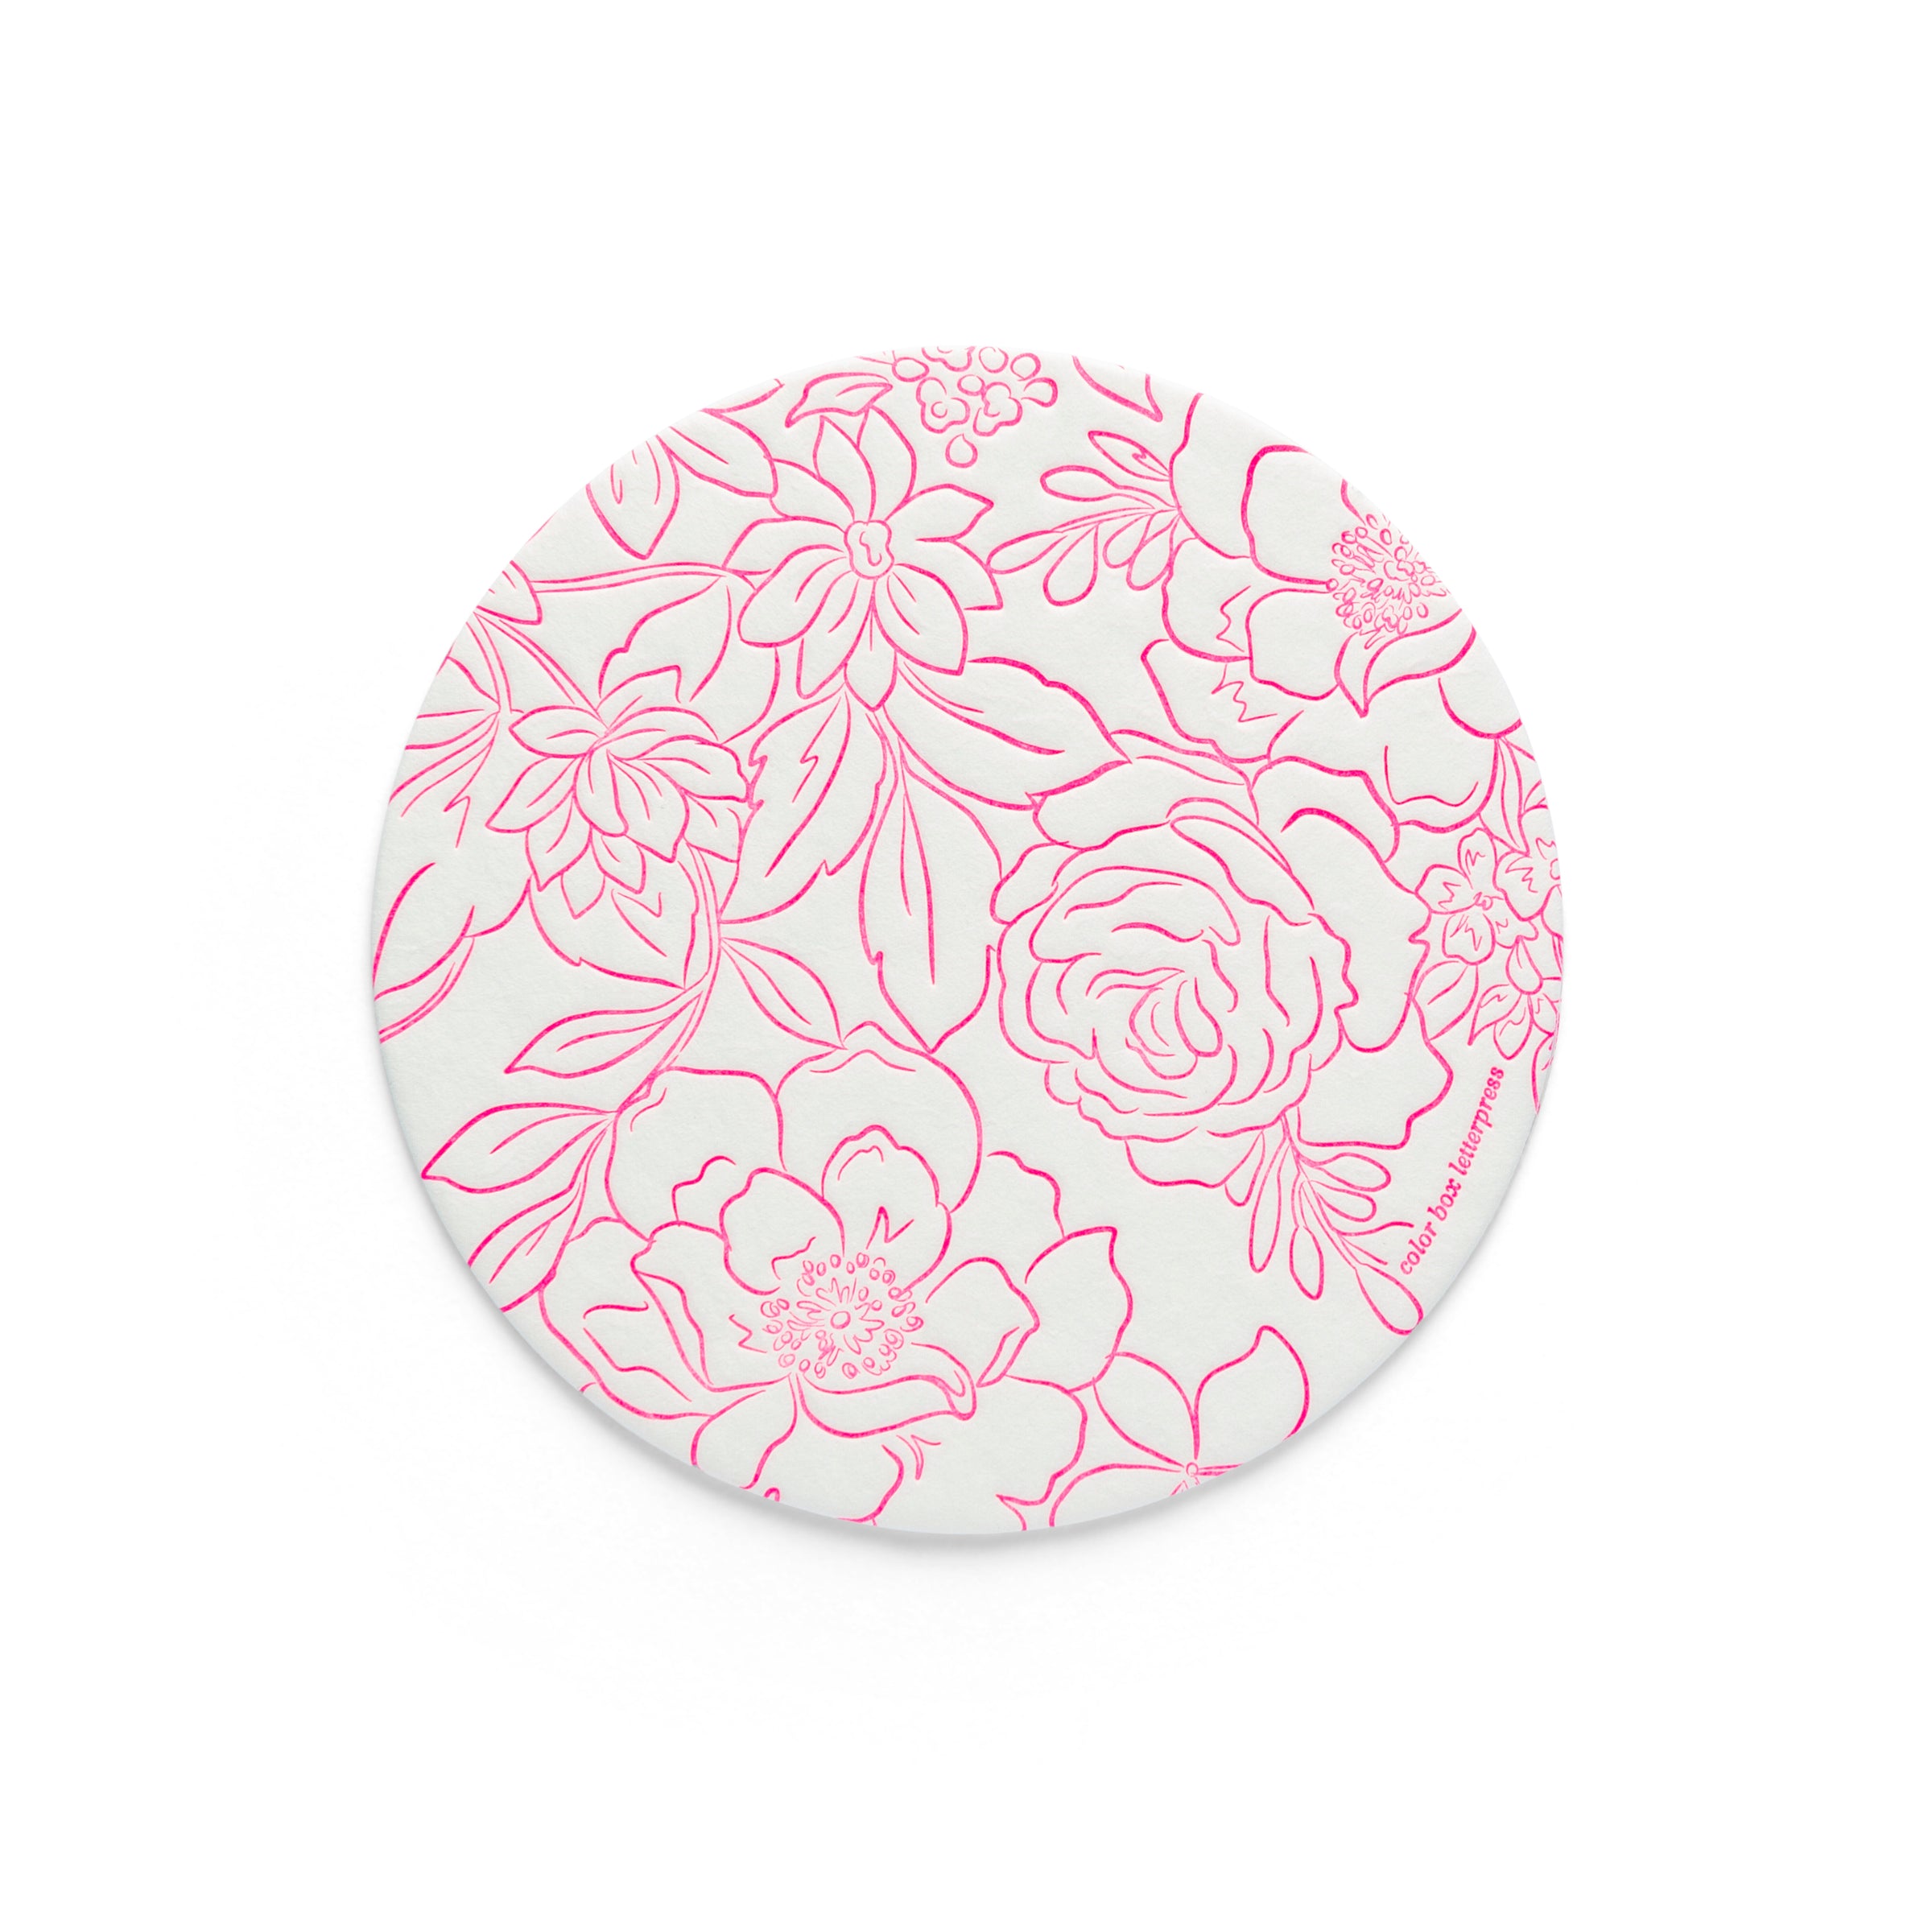 Extra Thirsty Coasters | Pink Floral